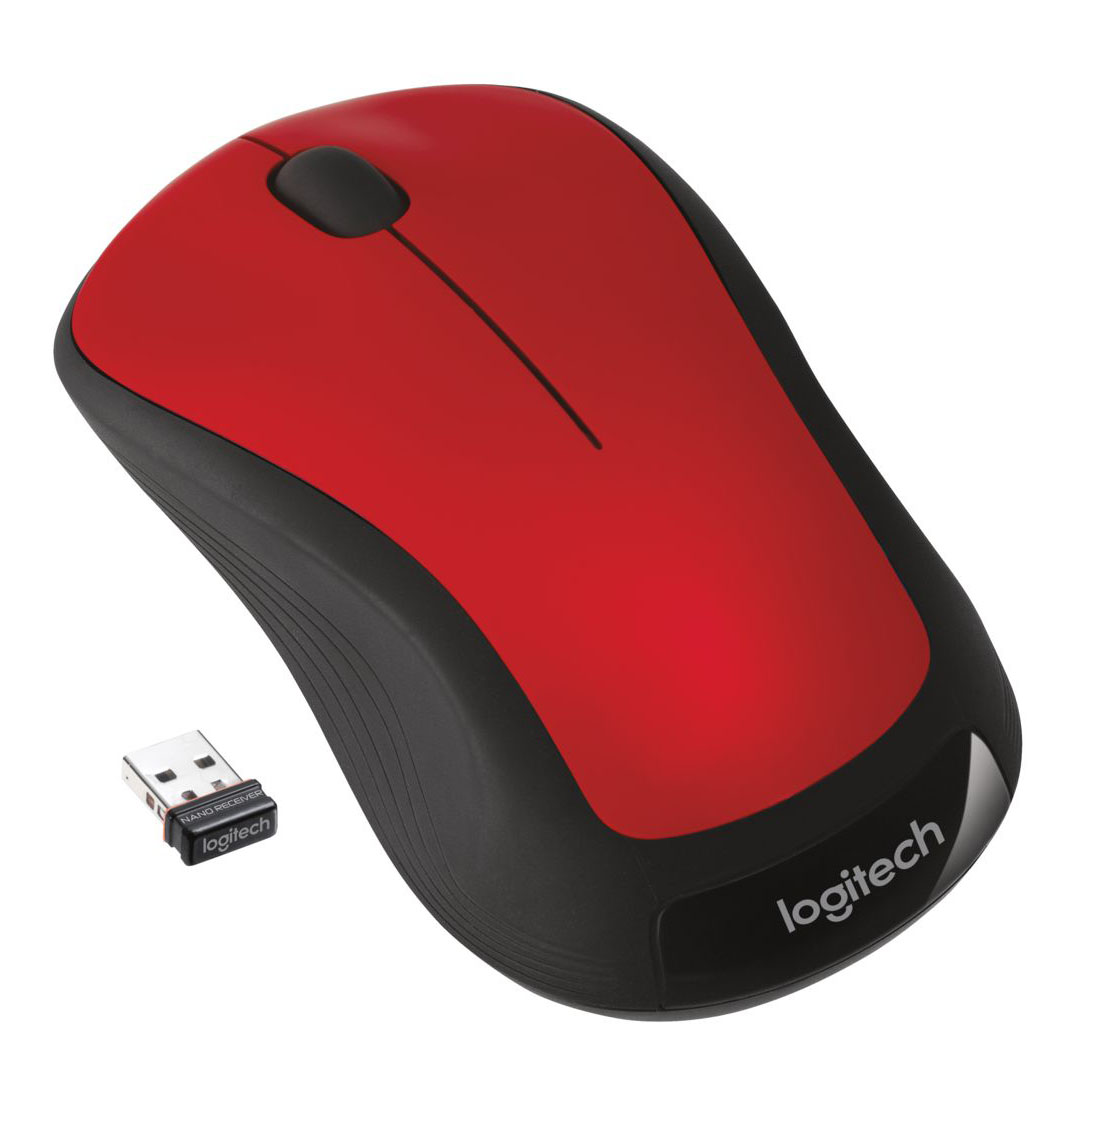 Logitech Full-Size Wireless Mouse, USB Nano Receiver, 1000 DPI Optical Tracking, Ambidextrous, Red - image 2 of 5